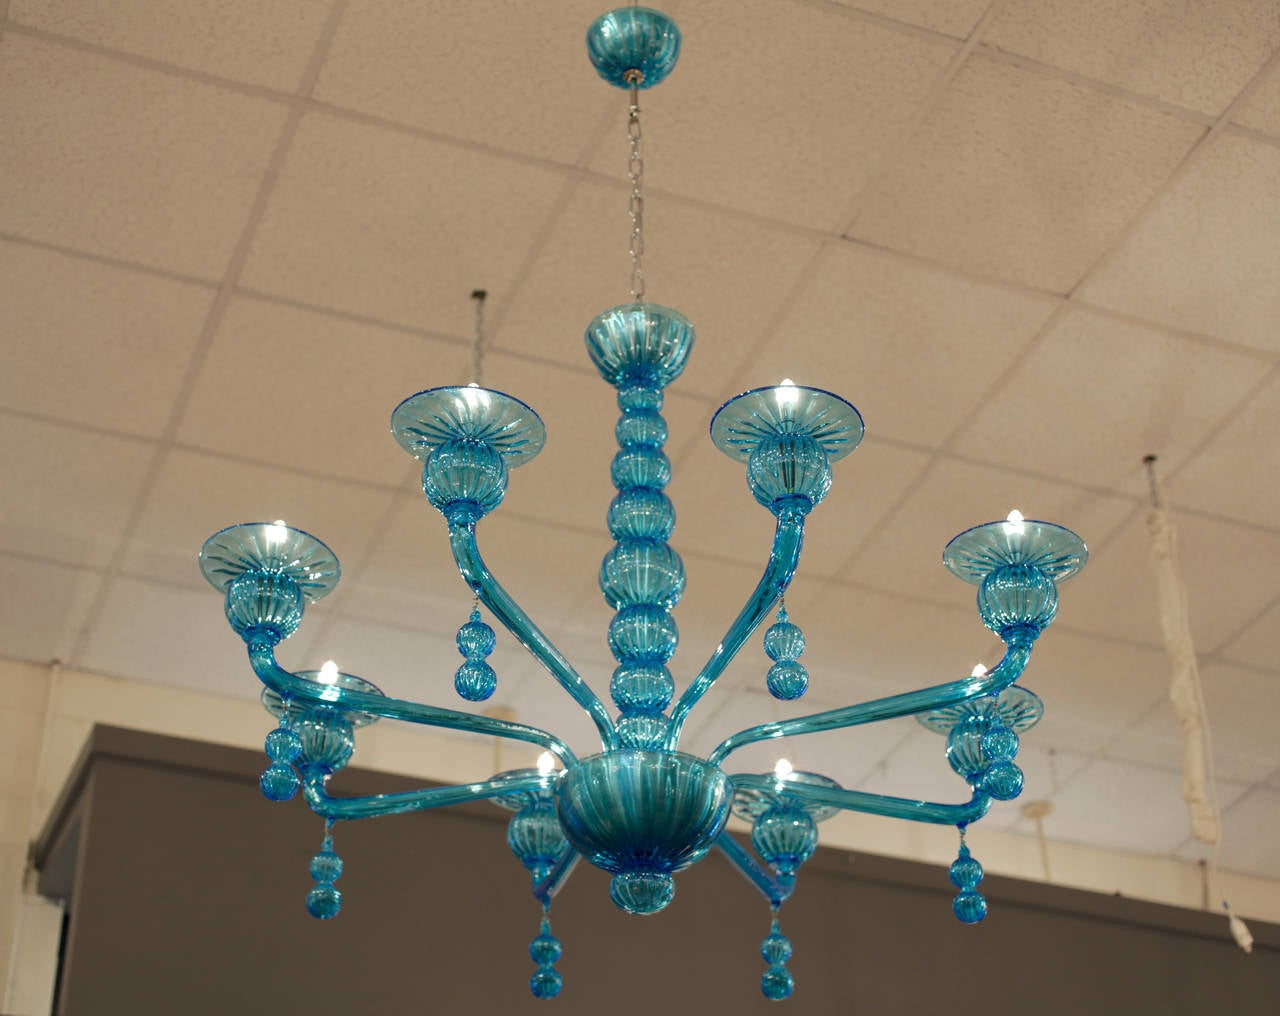 Handblown Murano glass chandelier in aquamarine with eight branches and hanging pendants. Eight candelabra lights, rewired to US standards. Height including chain and matching glass canopy is 60 inches. Another flawless design by Barbini, circa